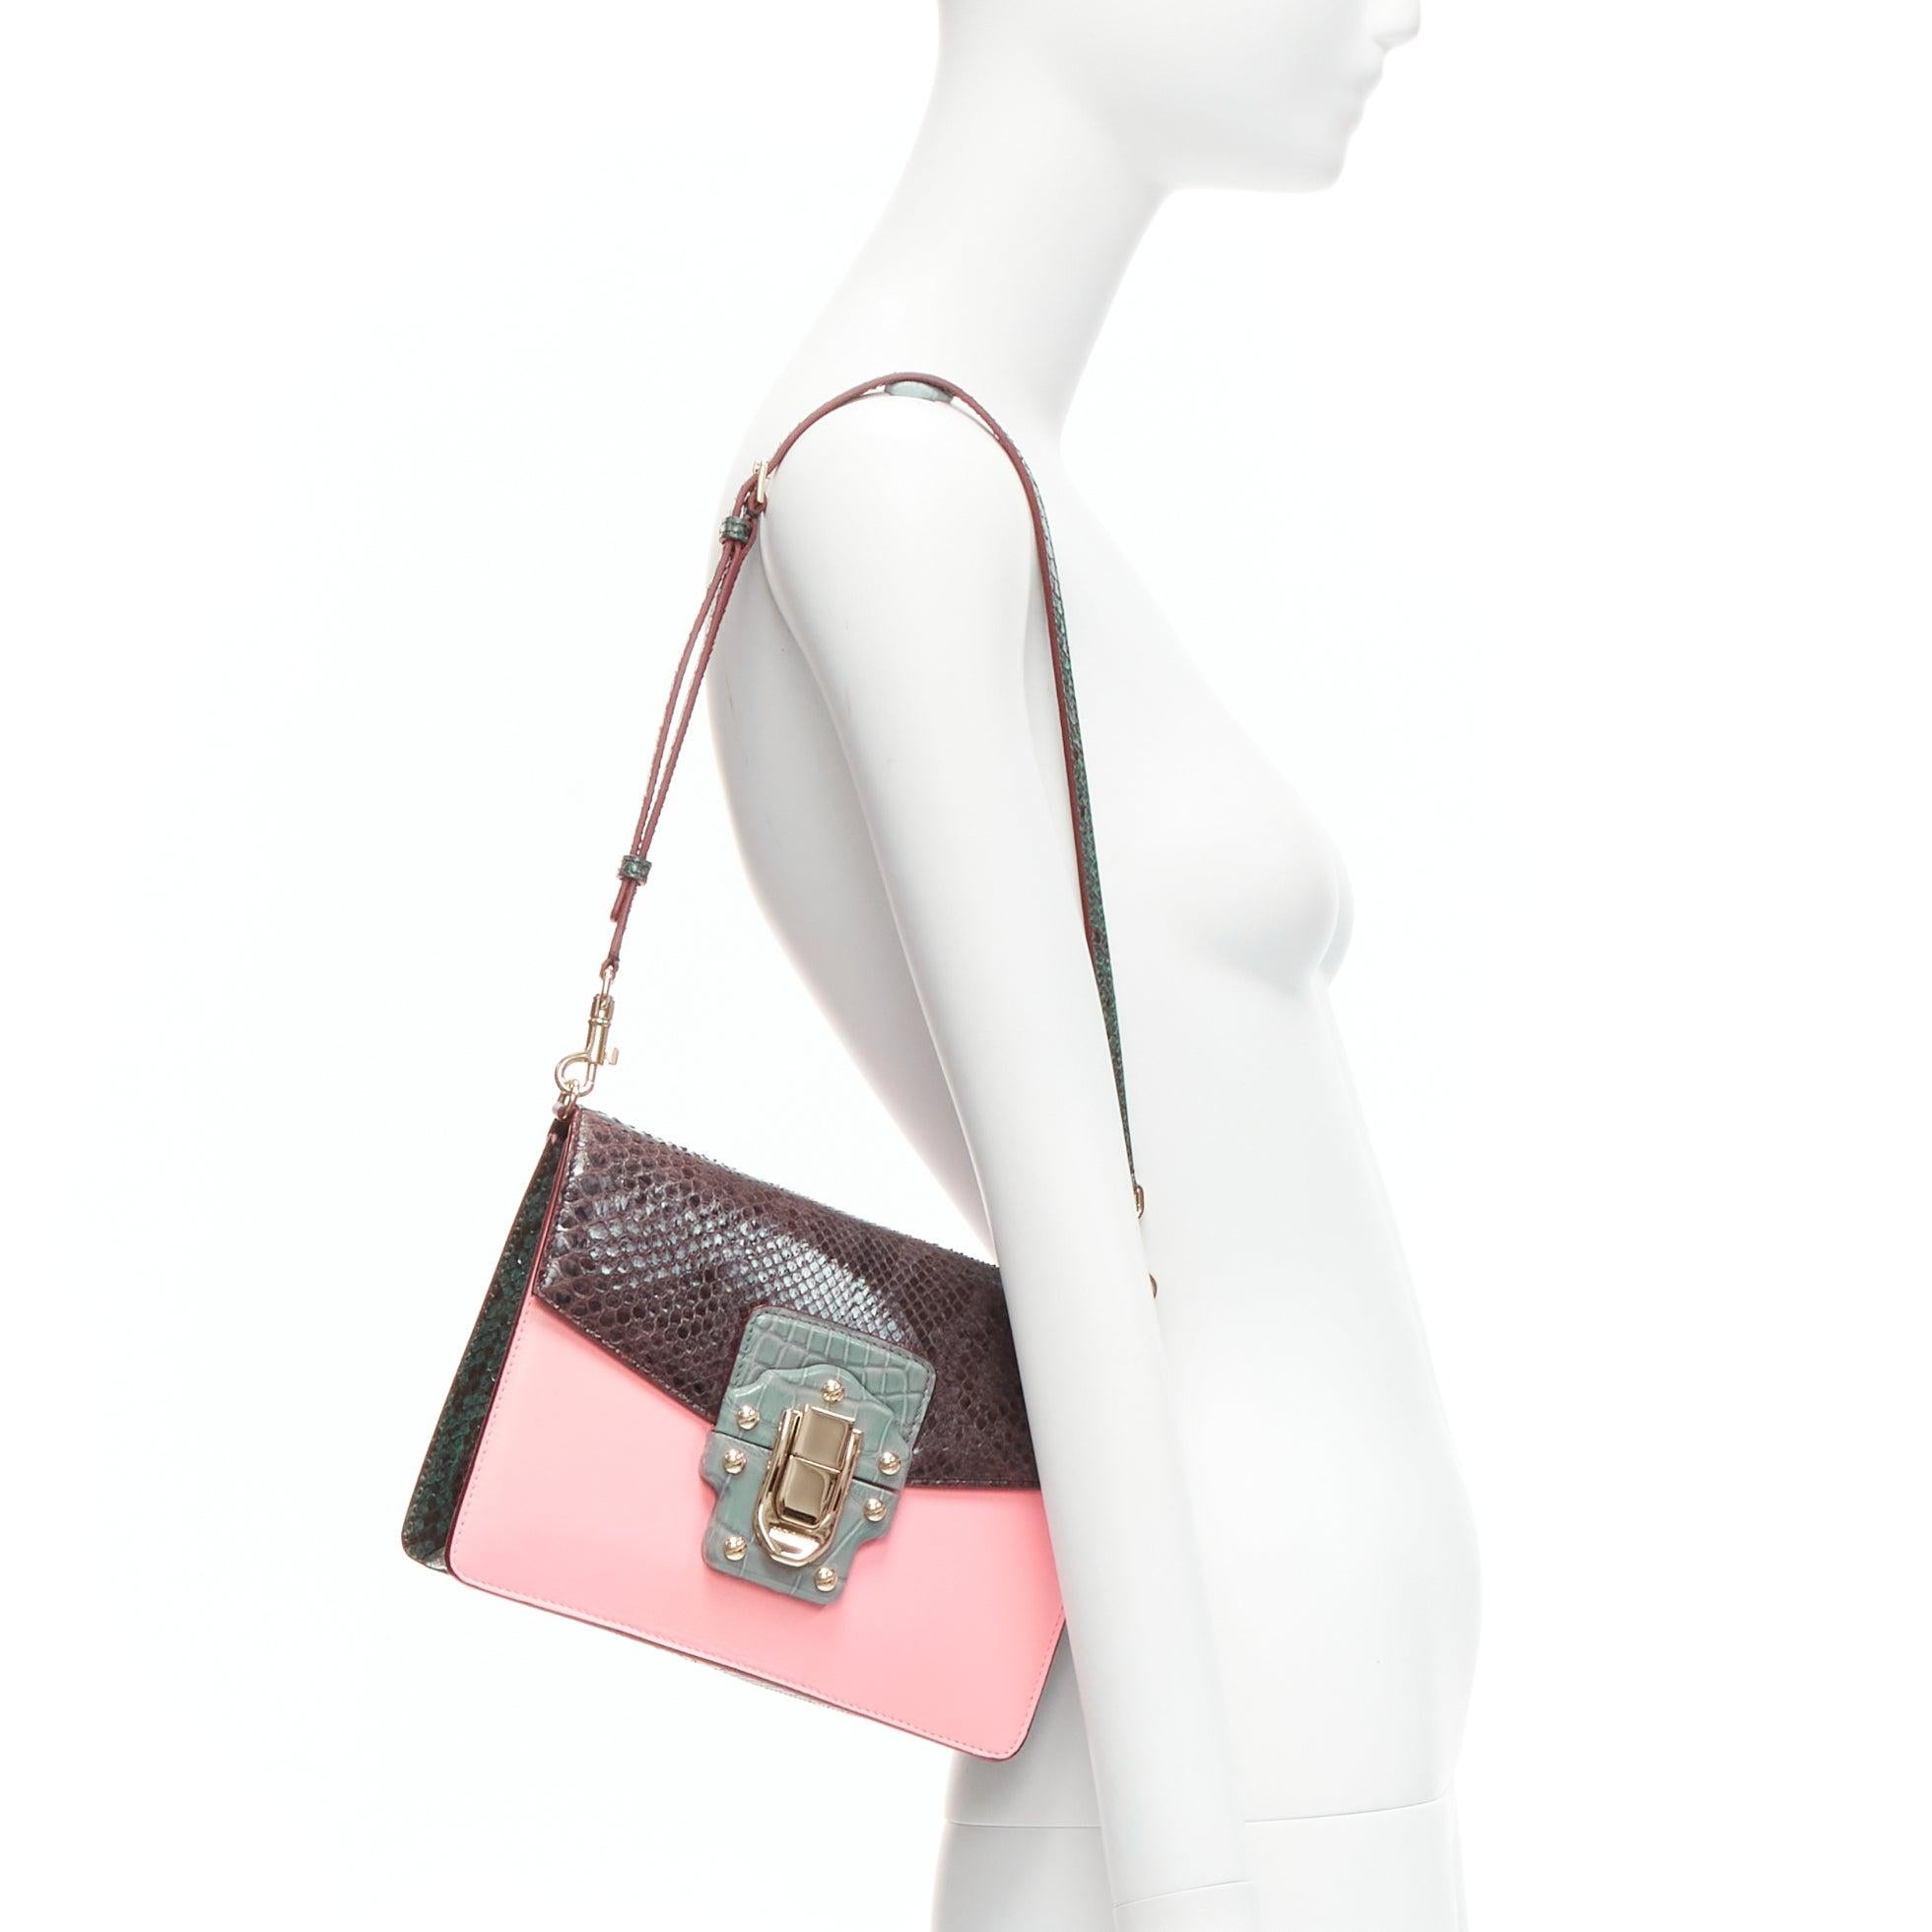 DOLCE GABBANA Lucia pink grey scaled leather flap clasp crossbody bag
Reference: TGAS/D00703
Brand: Dolce Gabbana
Designer: Domenico Dolce and Stefano Gabbana
Model: Lucia
Material: Leather
Color: Pink, Grey
Pattern: Animal Print
Closure: